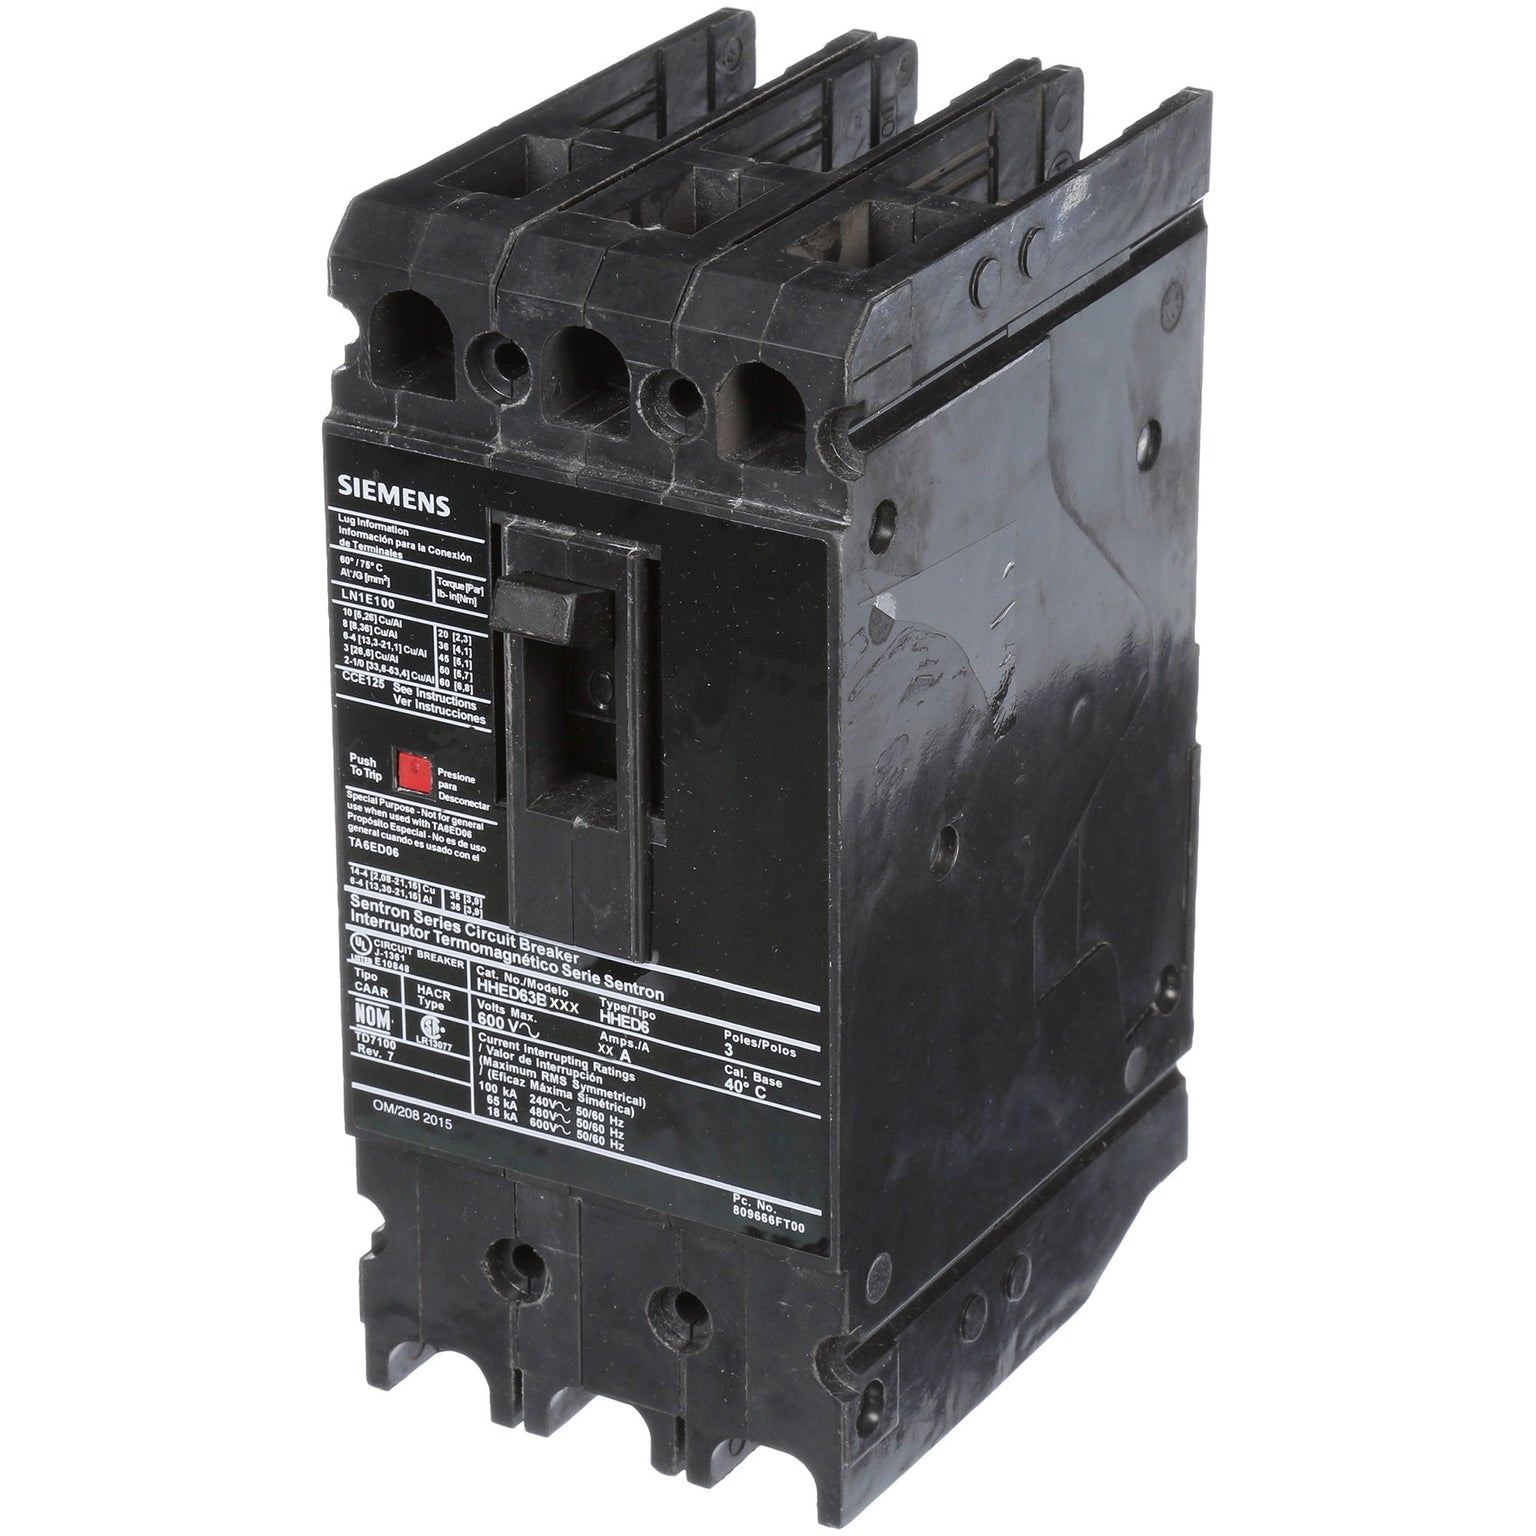 HHED63B015A - Siemens - Molded Case Circuit Breaker